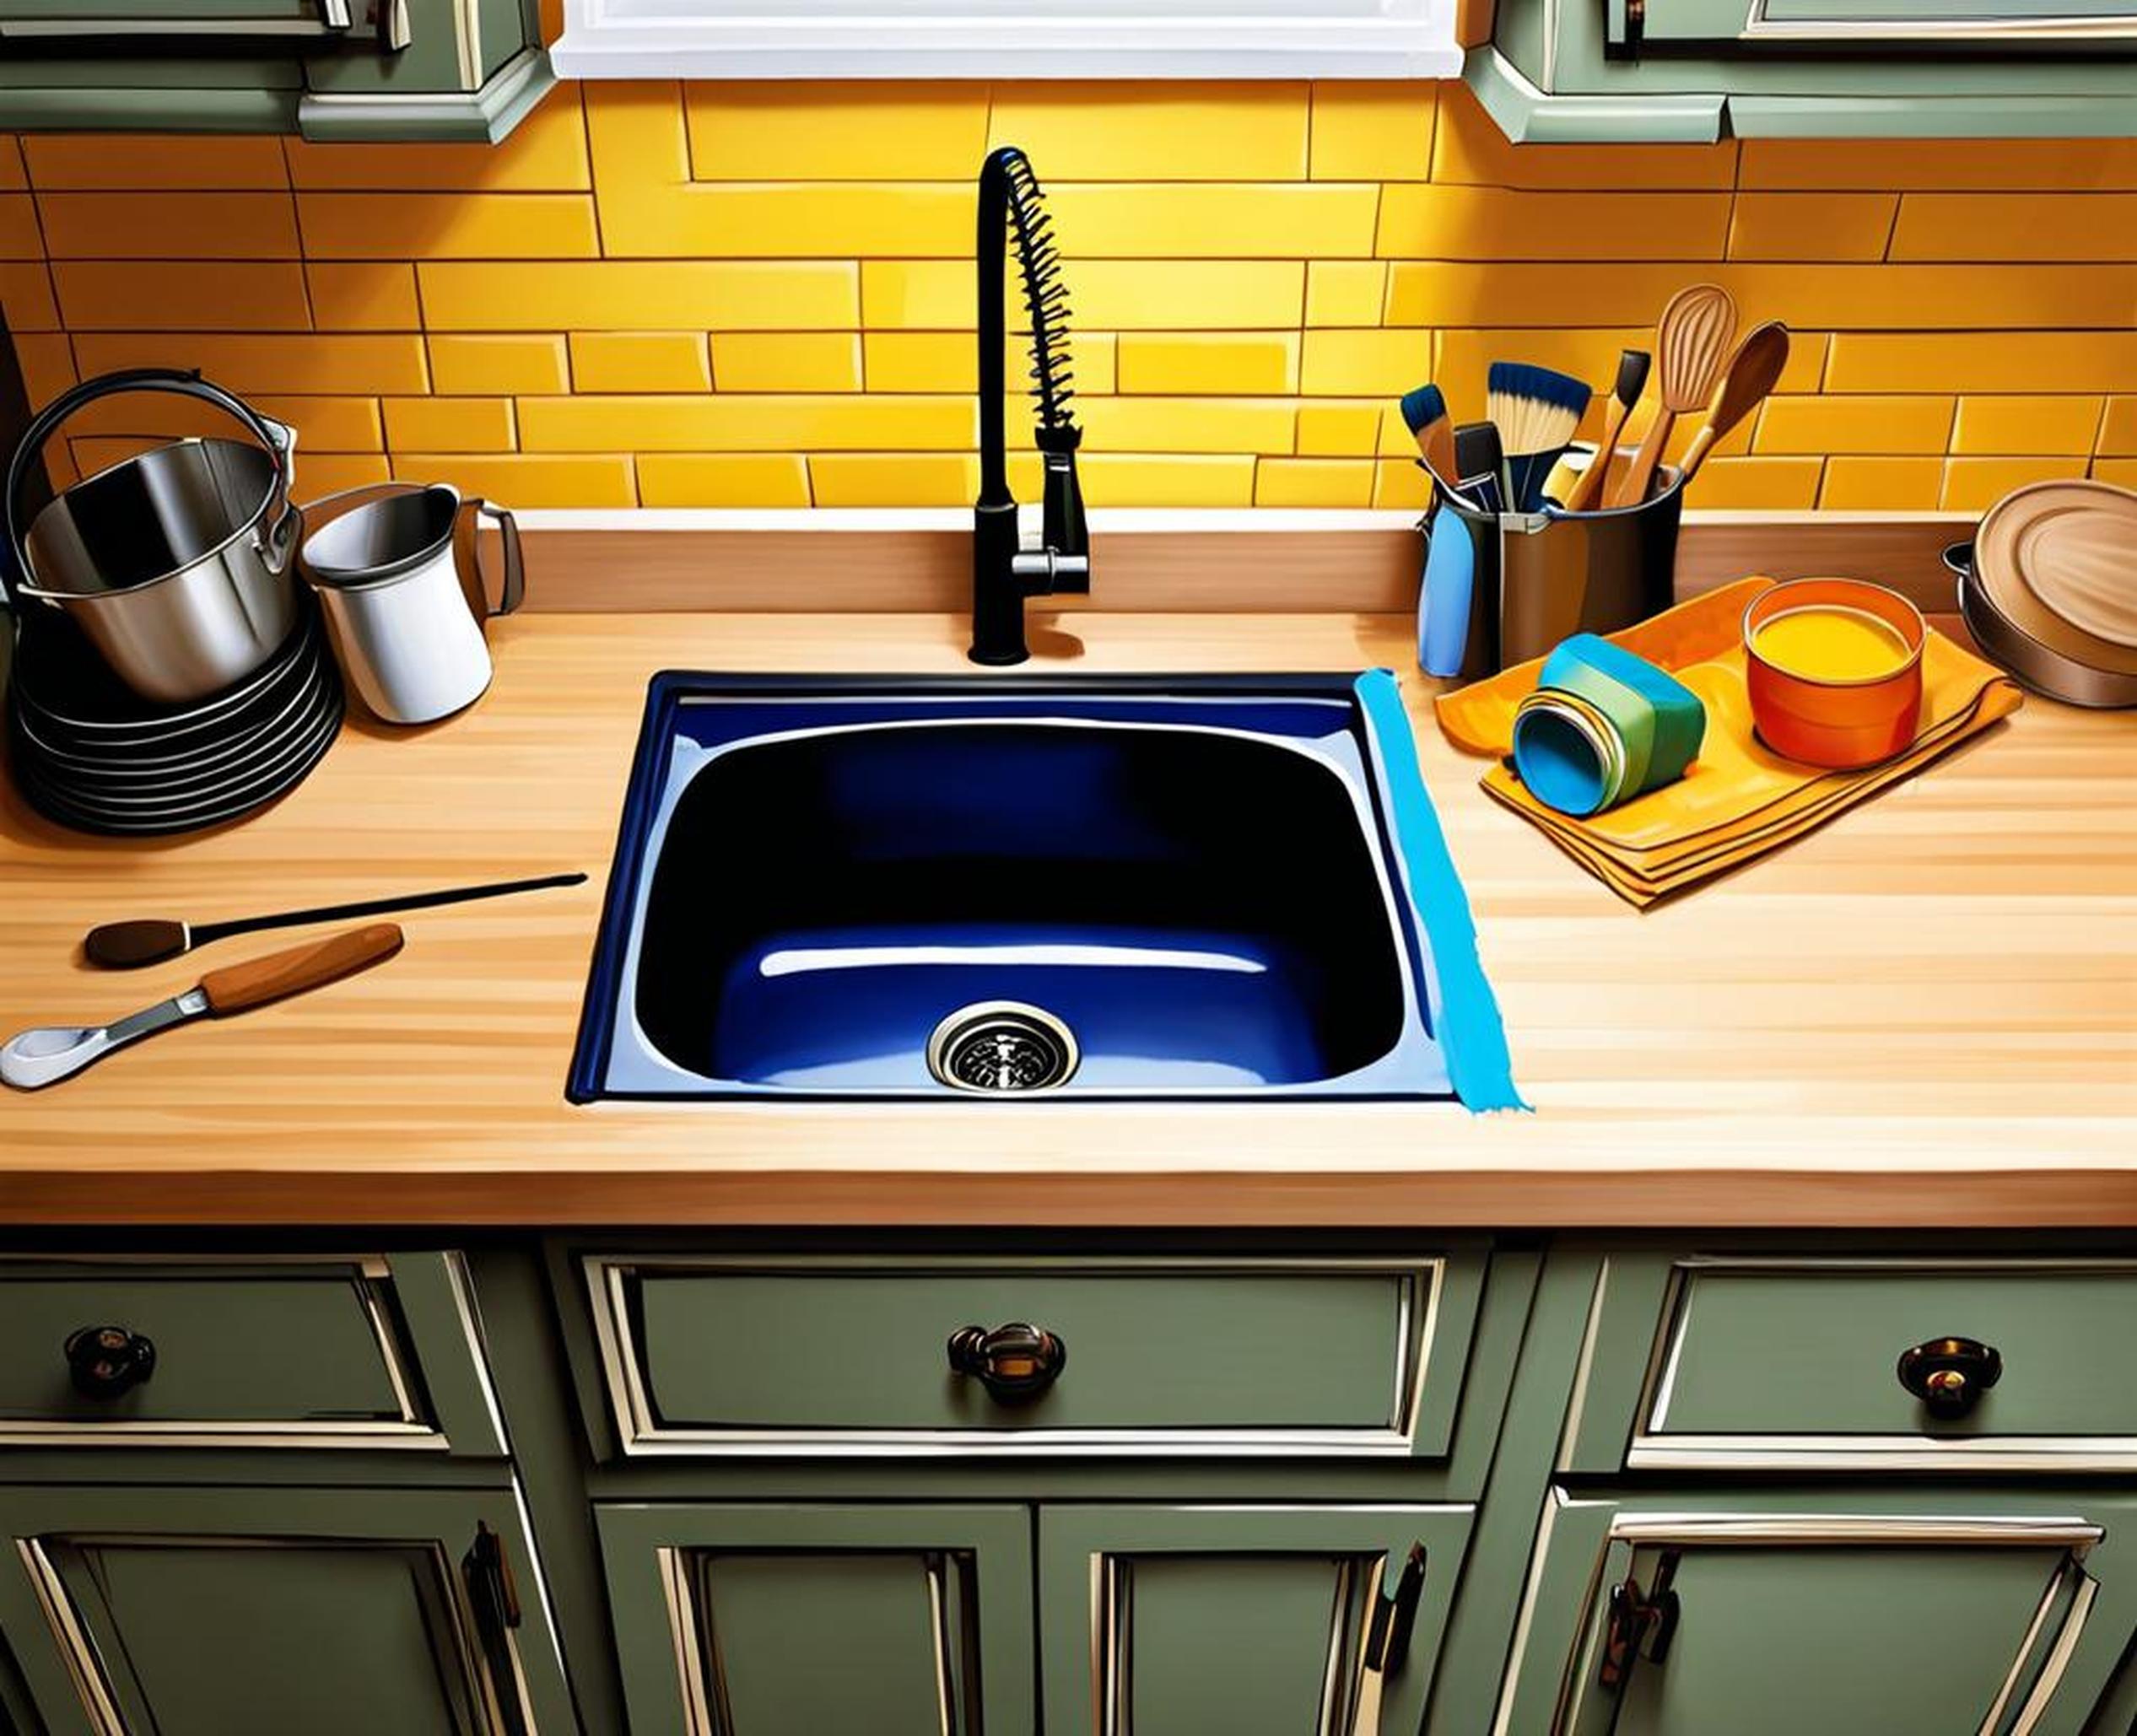 Painting a Kitchen Sink? Here’s What You Need to Know